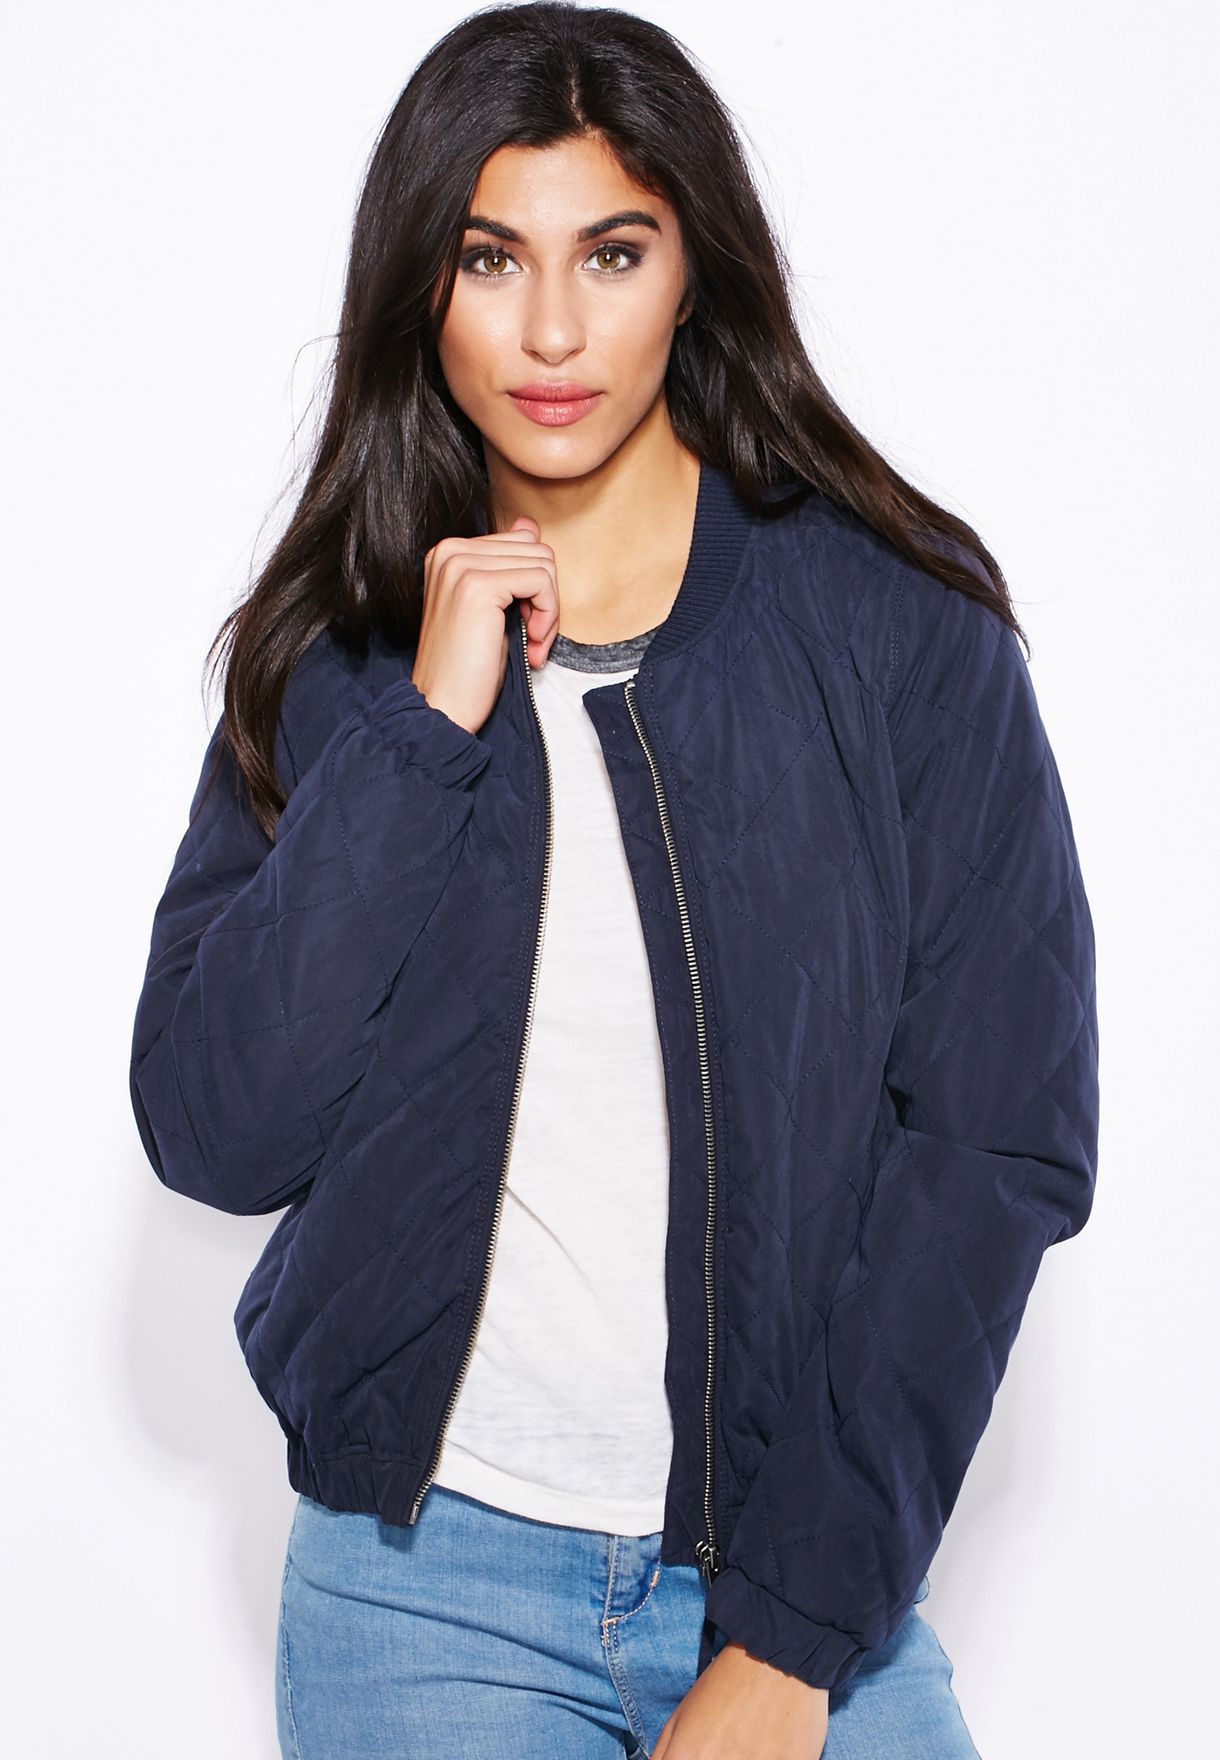 Korst streep Oh Buy Jacqueline De Yong blue Quilted Bomber Jacket for Women in MENA,  Worldwide